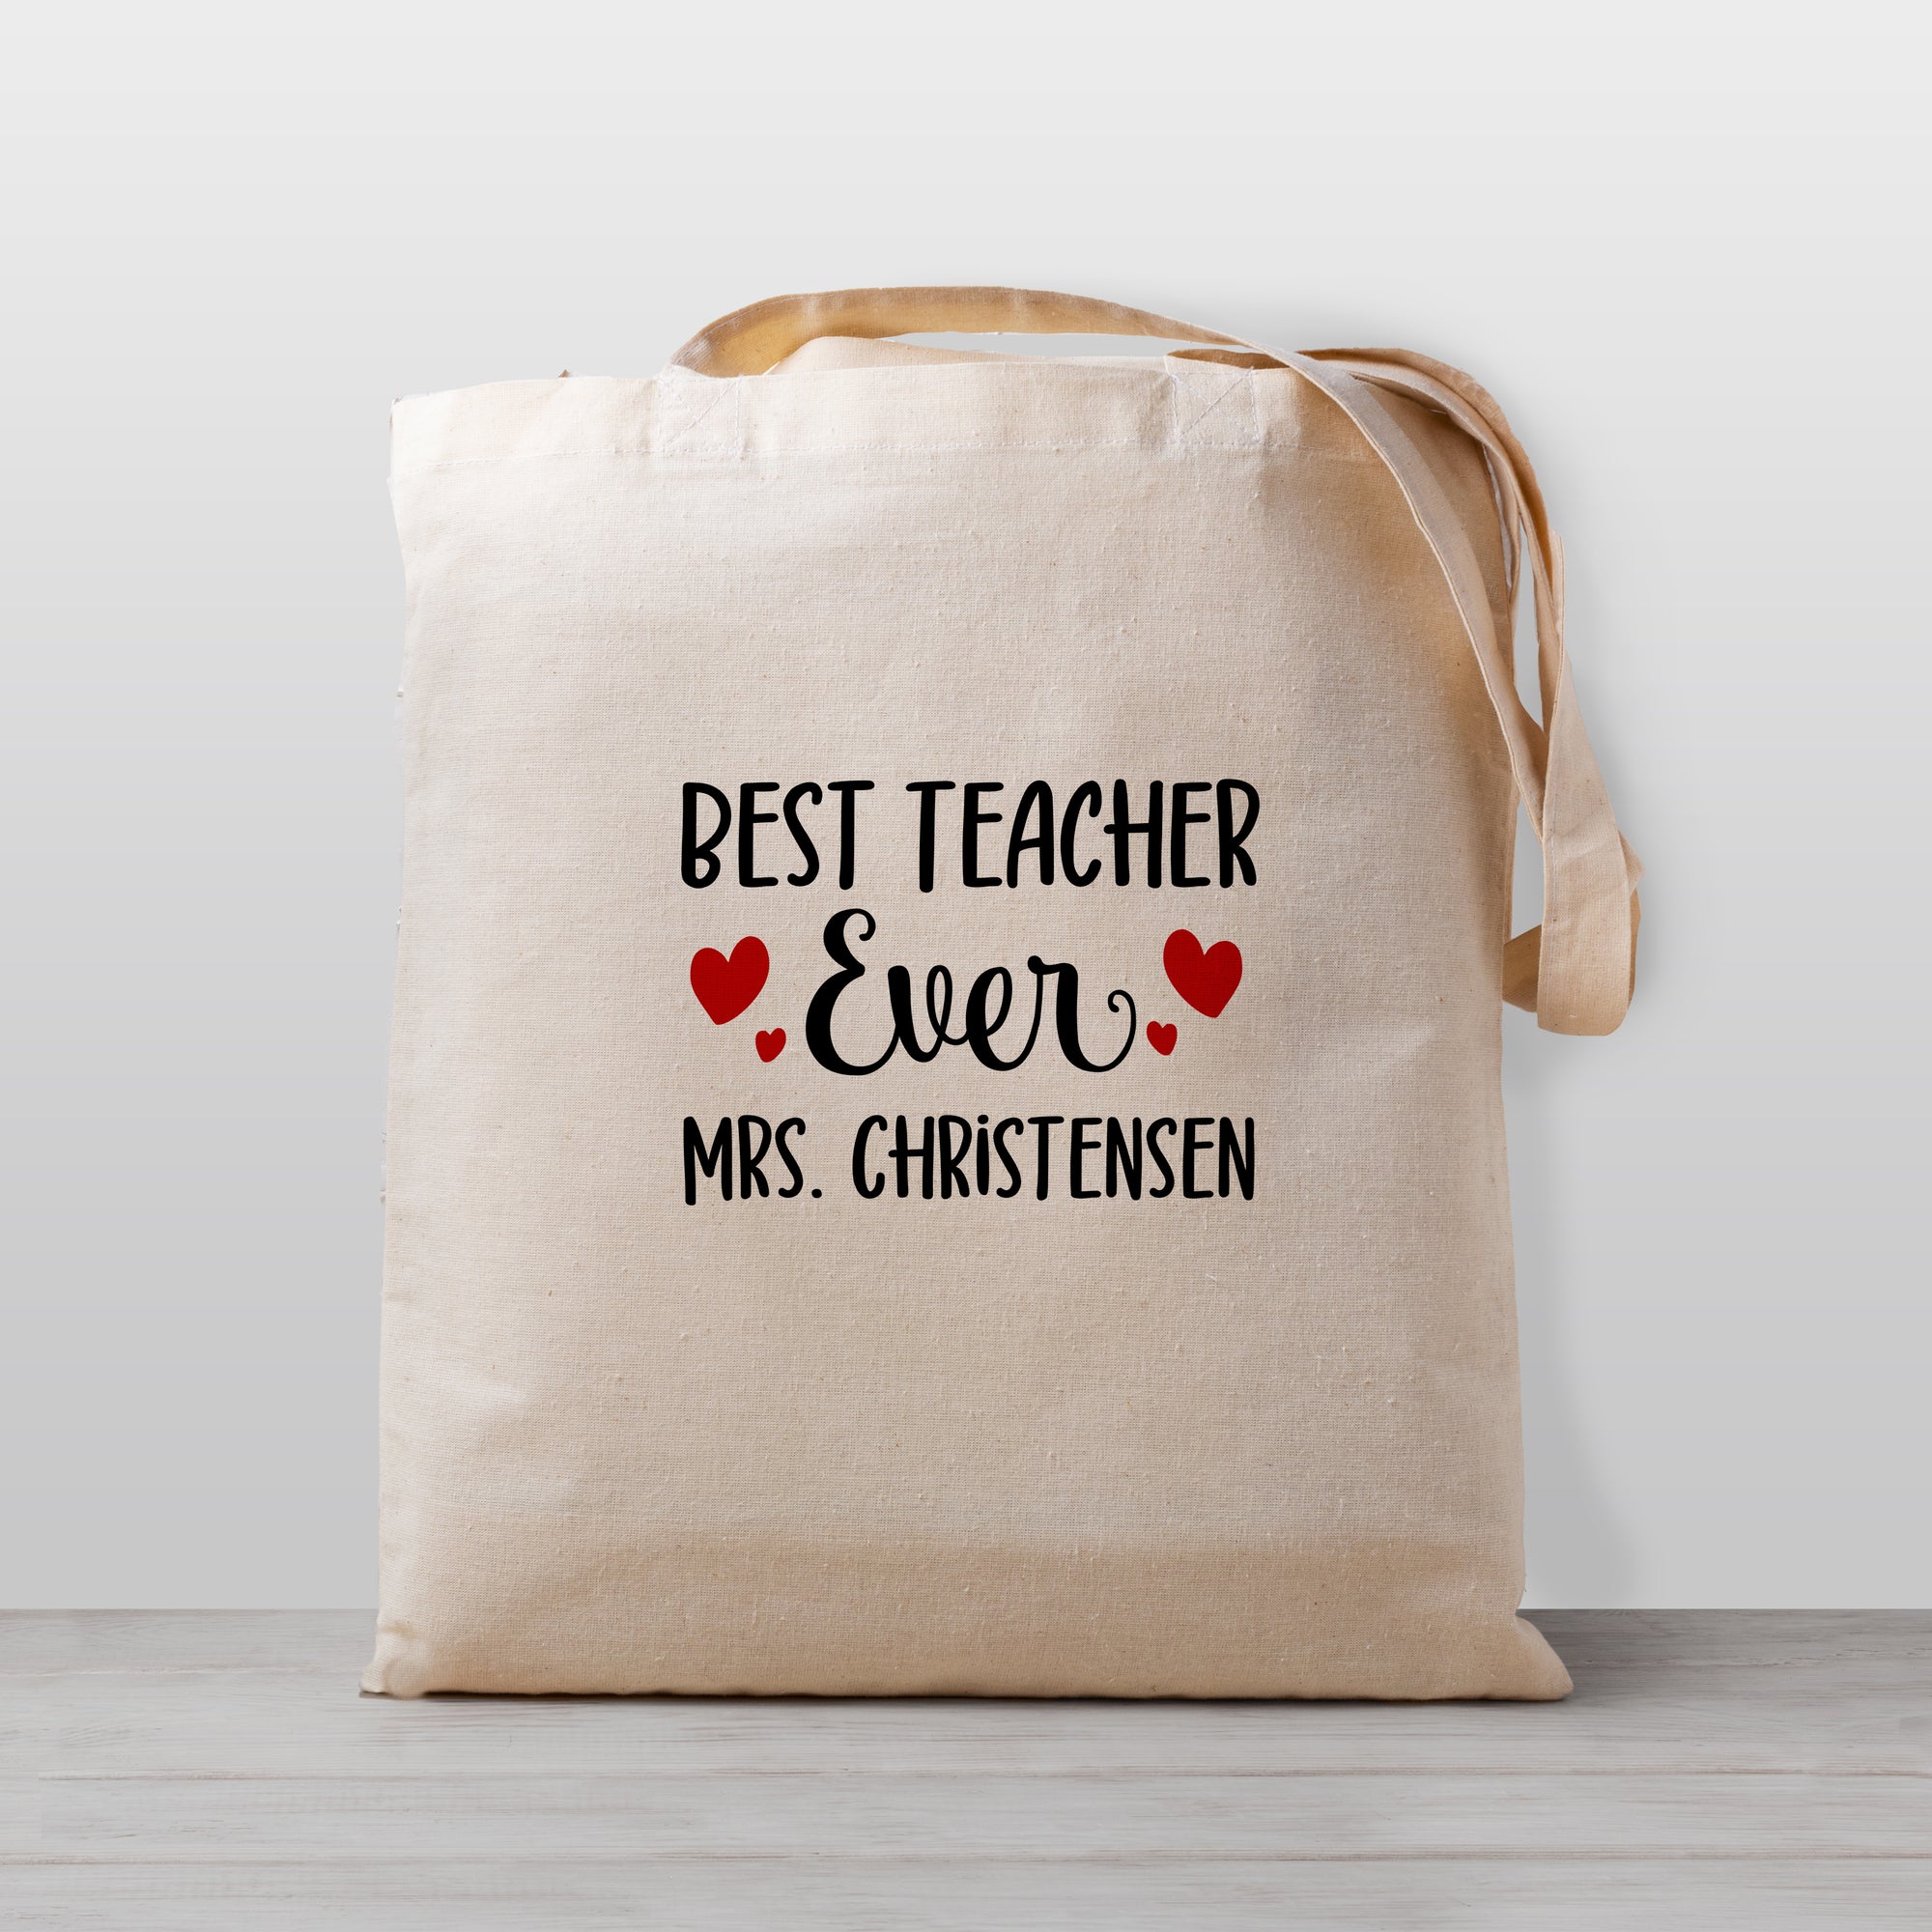 Best Teacher Ever Personalized Tote Bag, 100% Natural Cotton Canvas, Pipsy.com